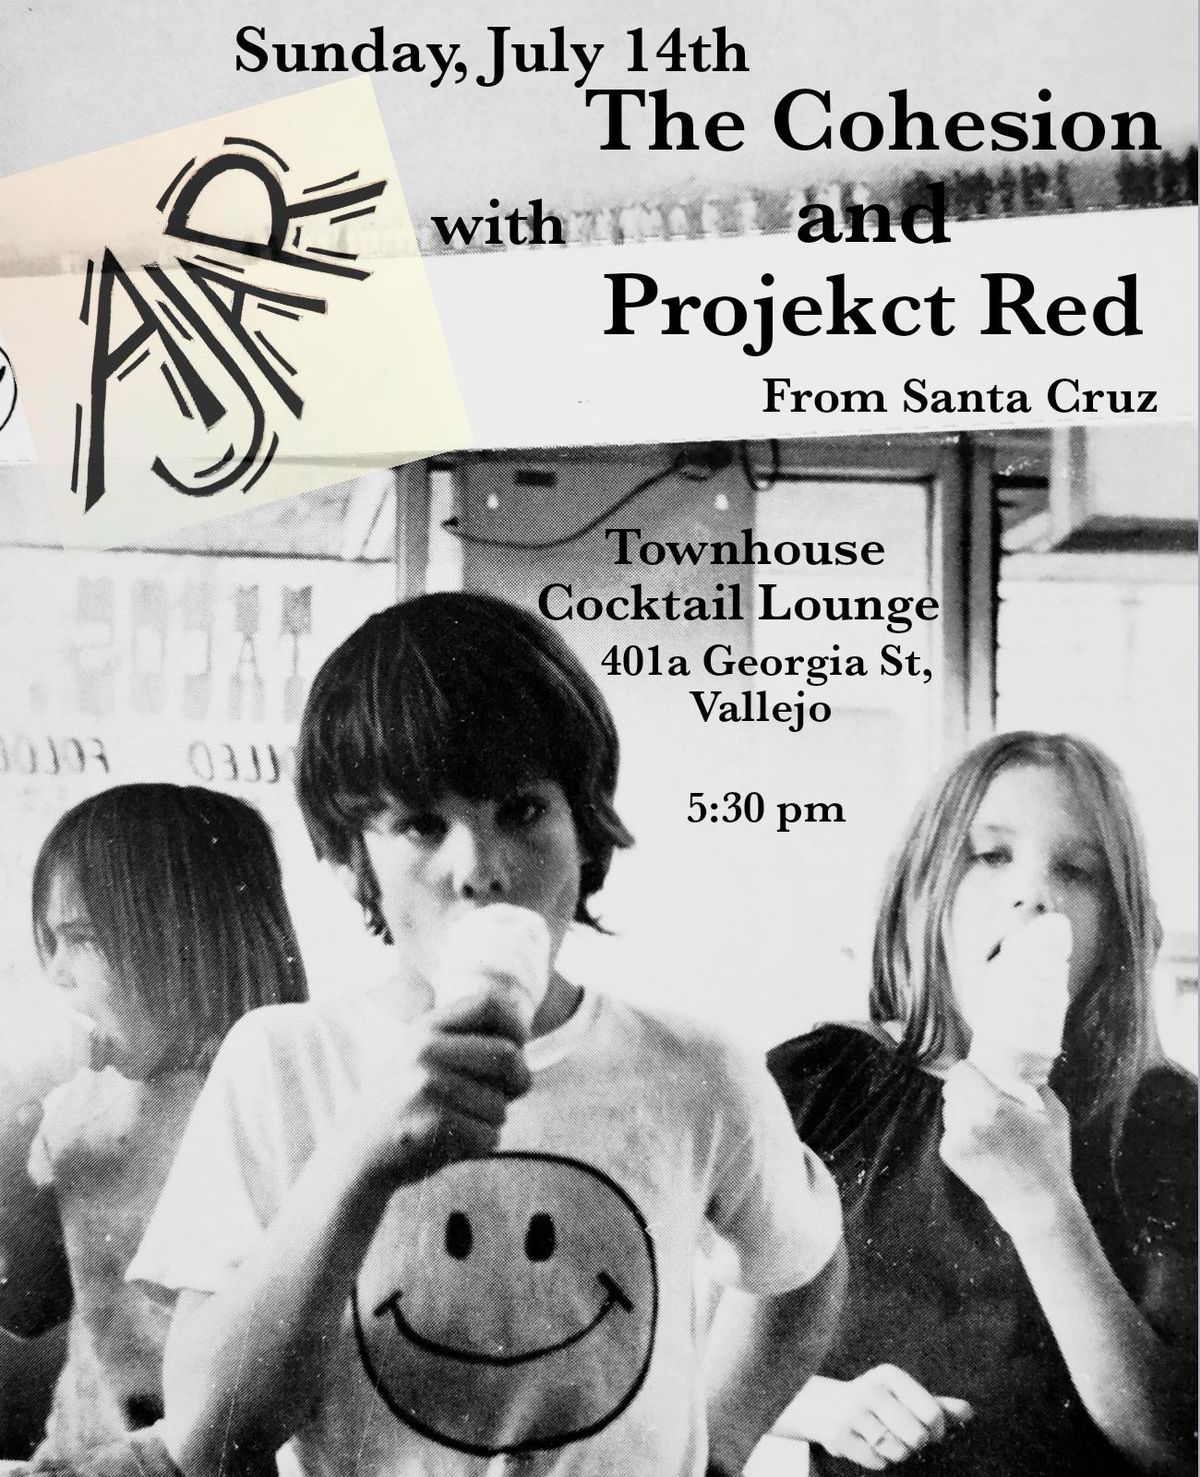 AJAR WITH COHESION AND PROJEKCT RED